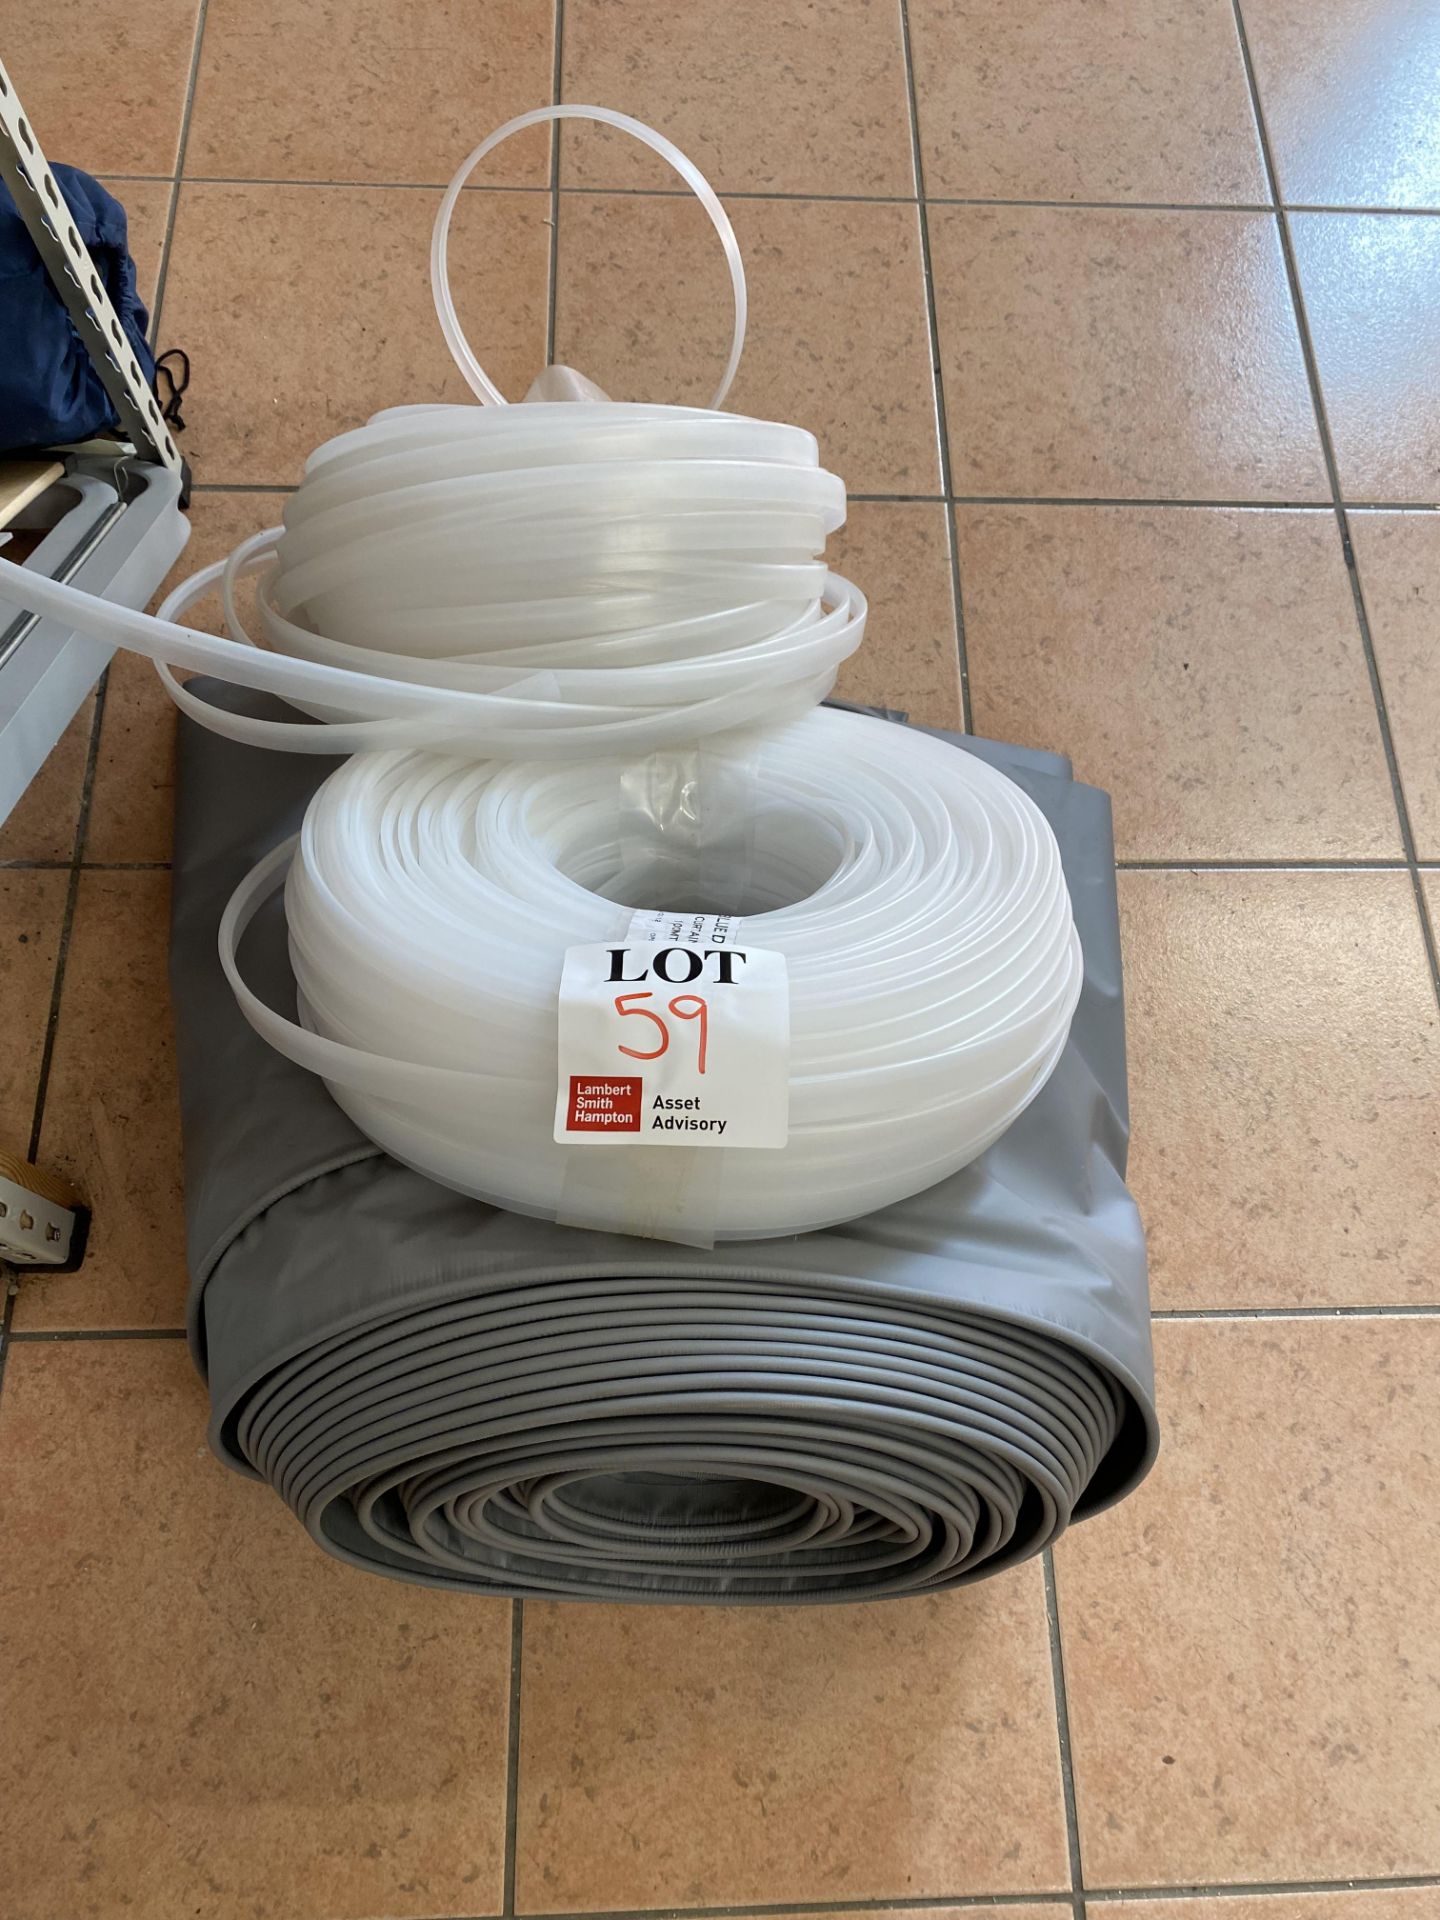 Approx 20m of awning skirt and one reel of plastic / rubber trim